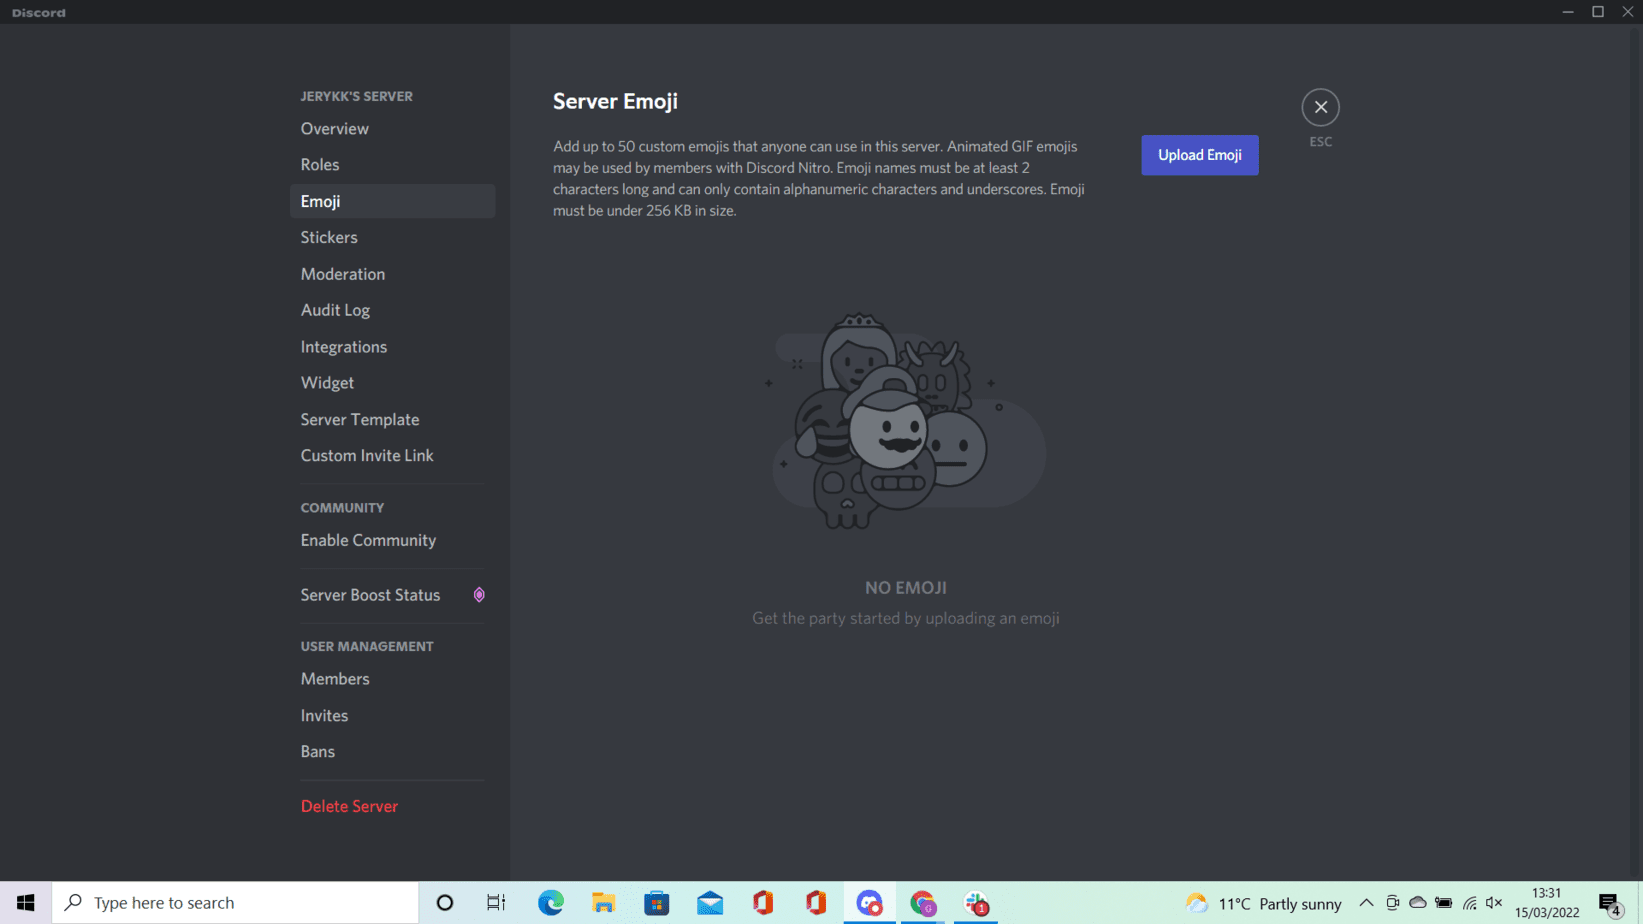 How To Upload Your Emoji To Discord